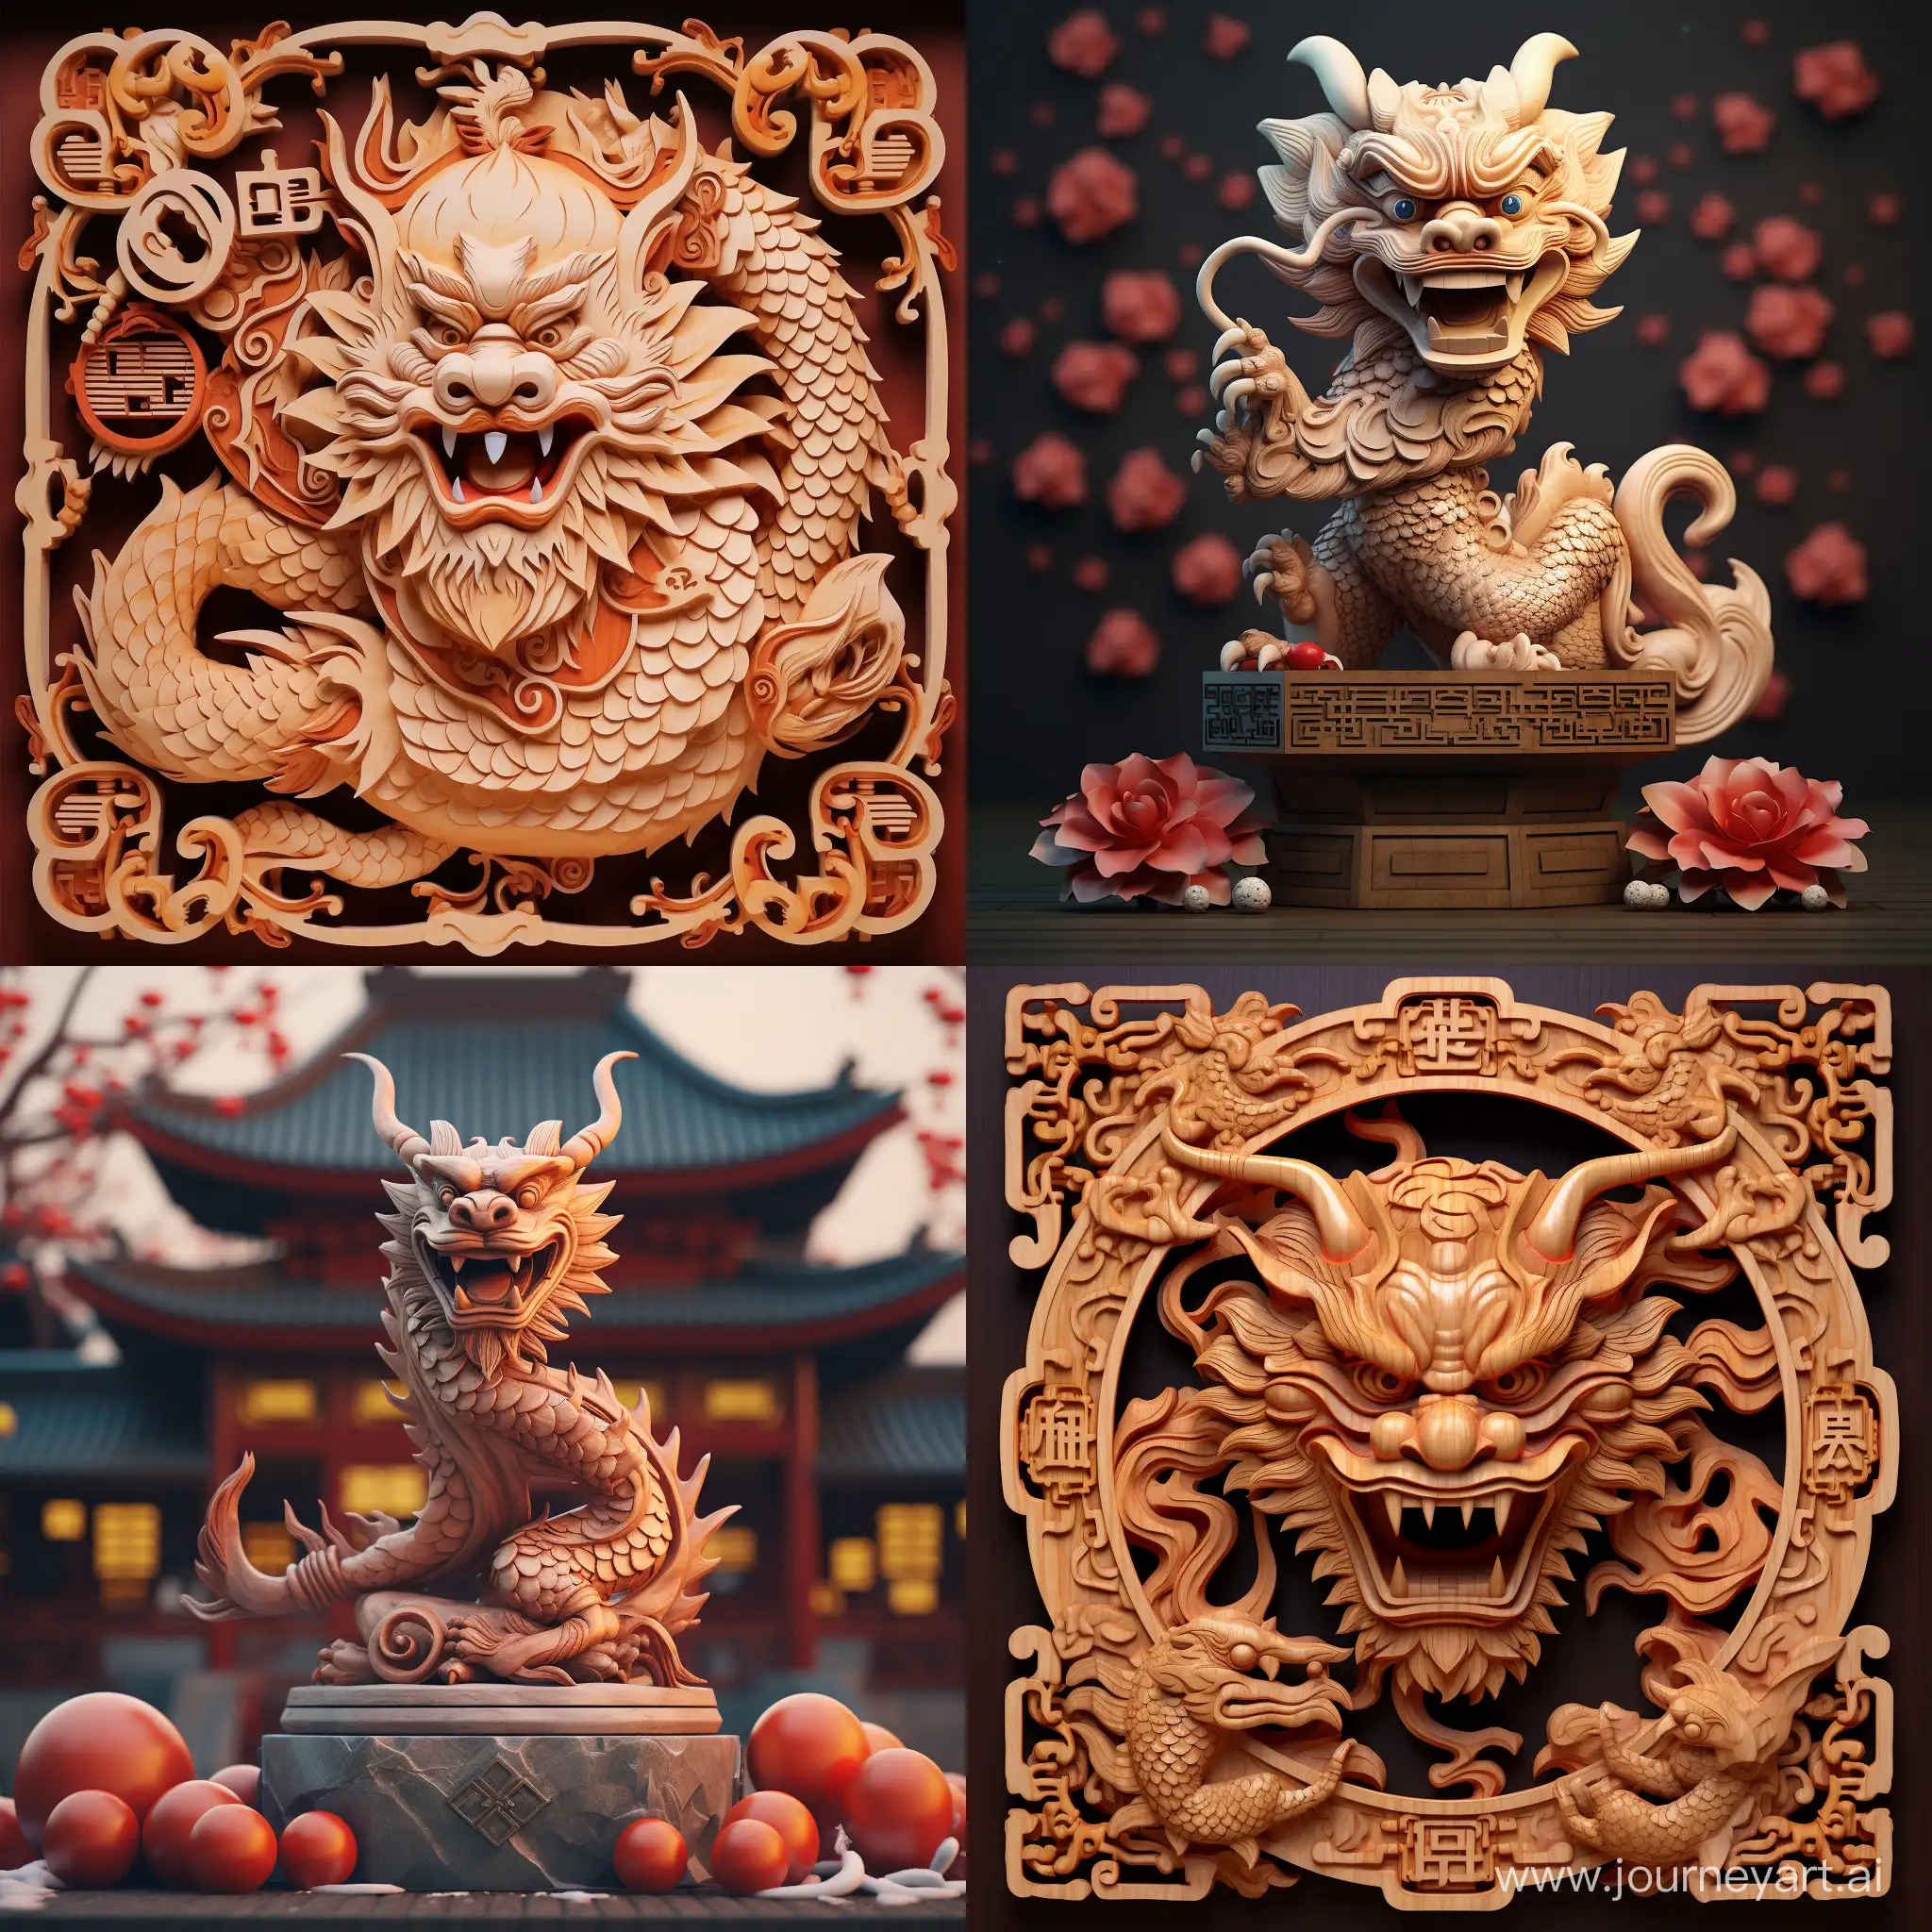 Joyful-New-Year-Wishes-with-Chinese-Wooden-Dragon-Blessings